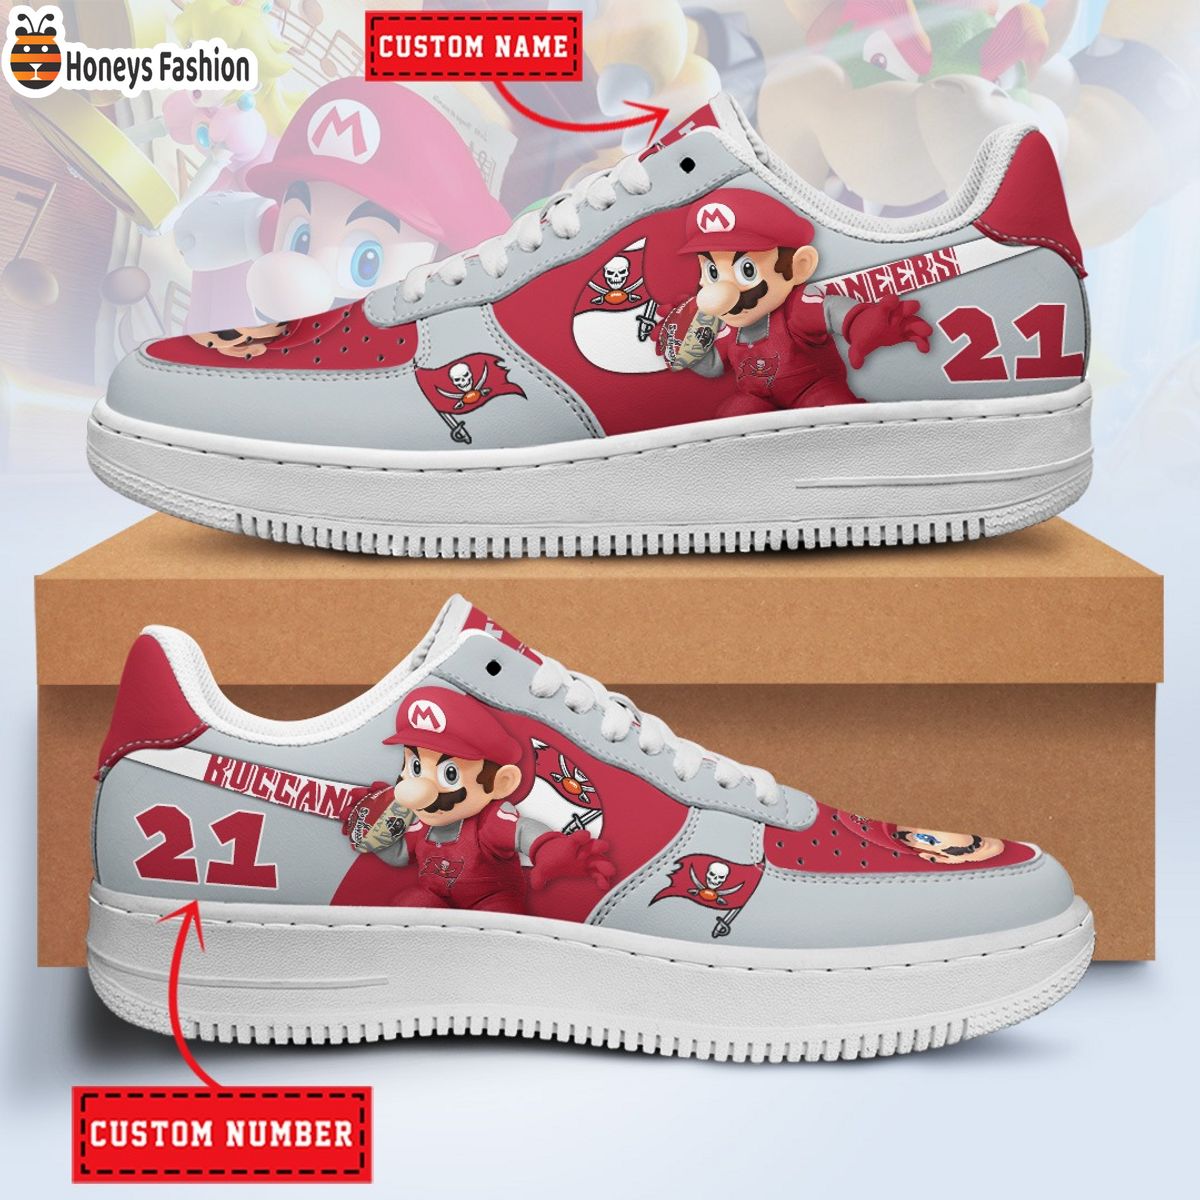 Tampa Bay Buccaneers Mario NFL Personalized Air Force 1 Shoes